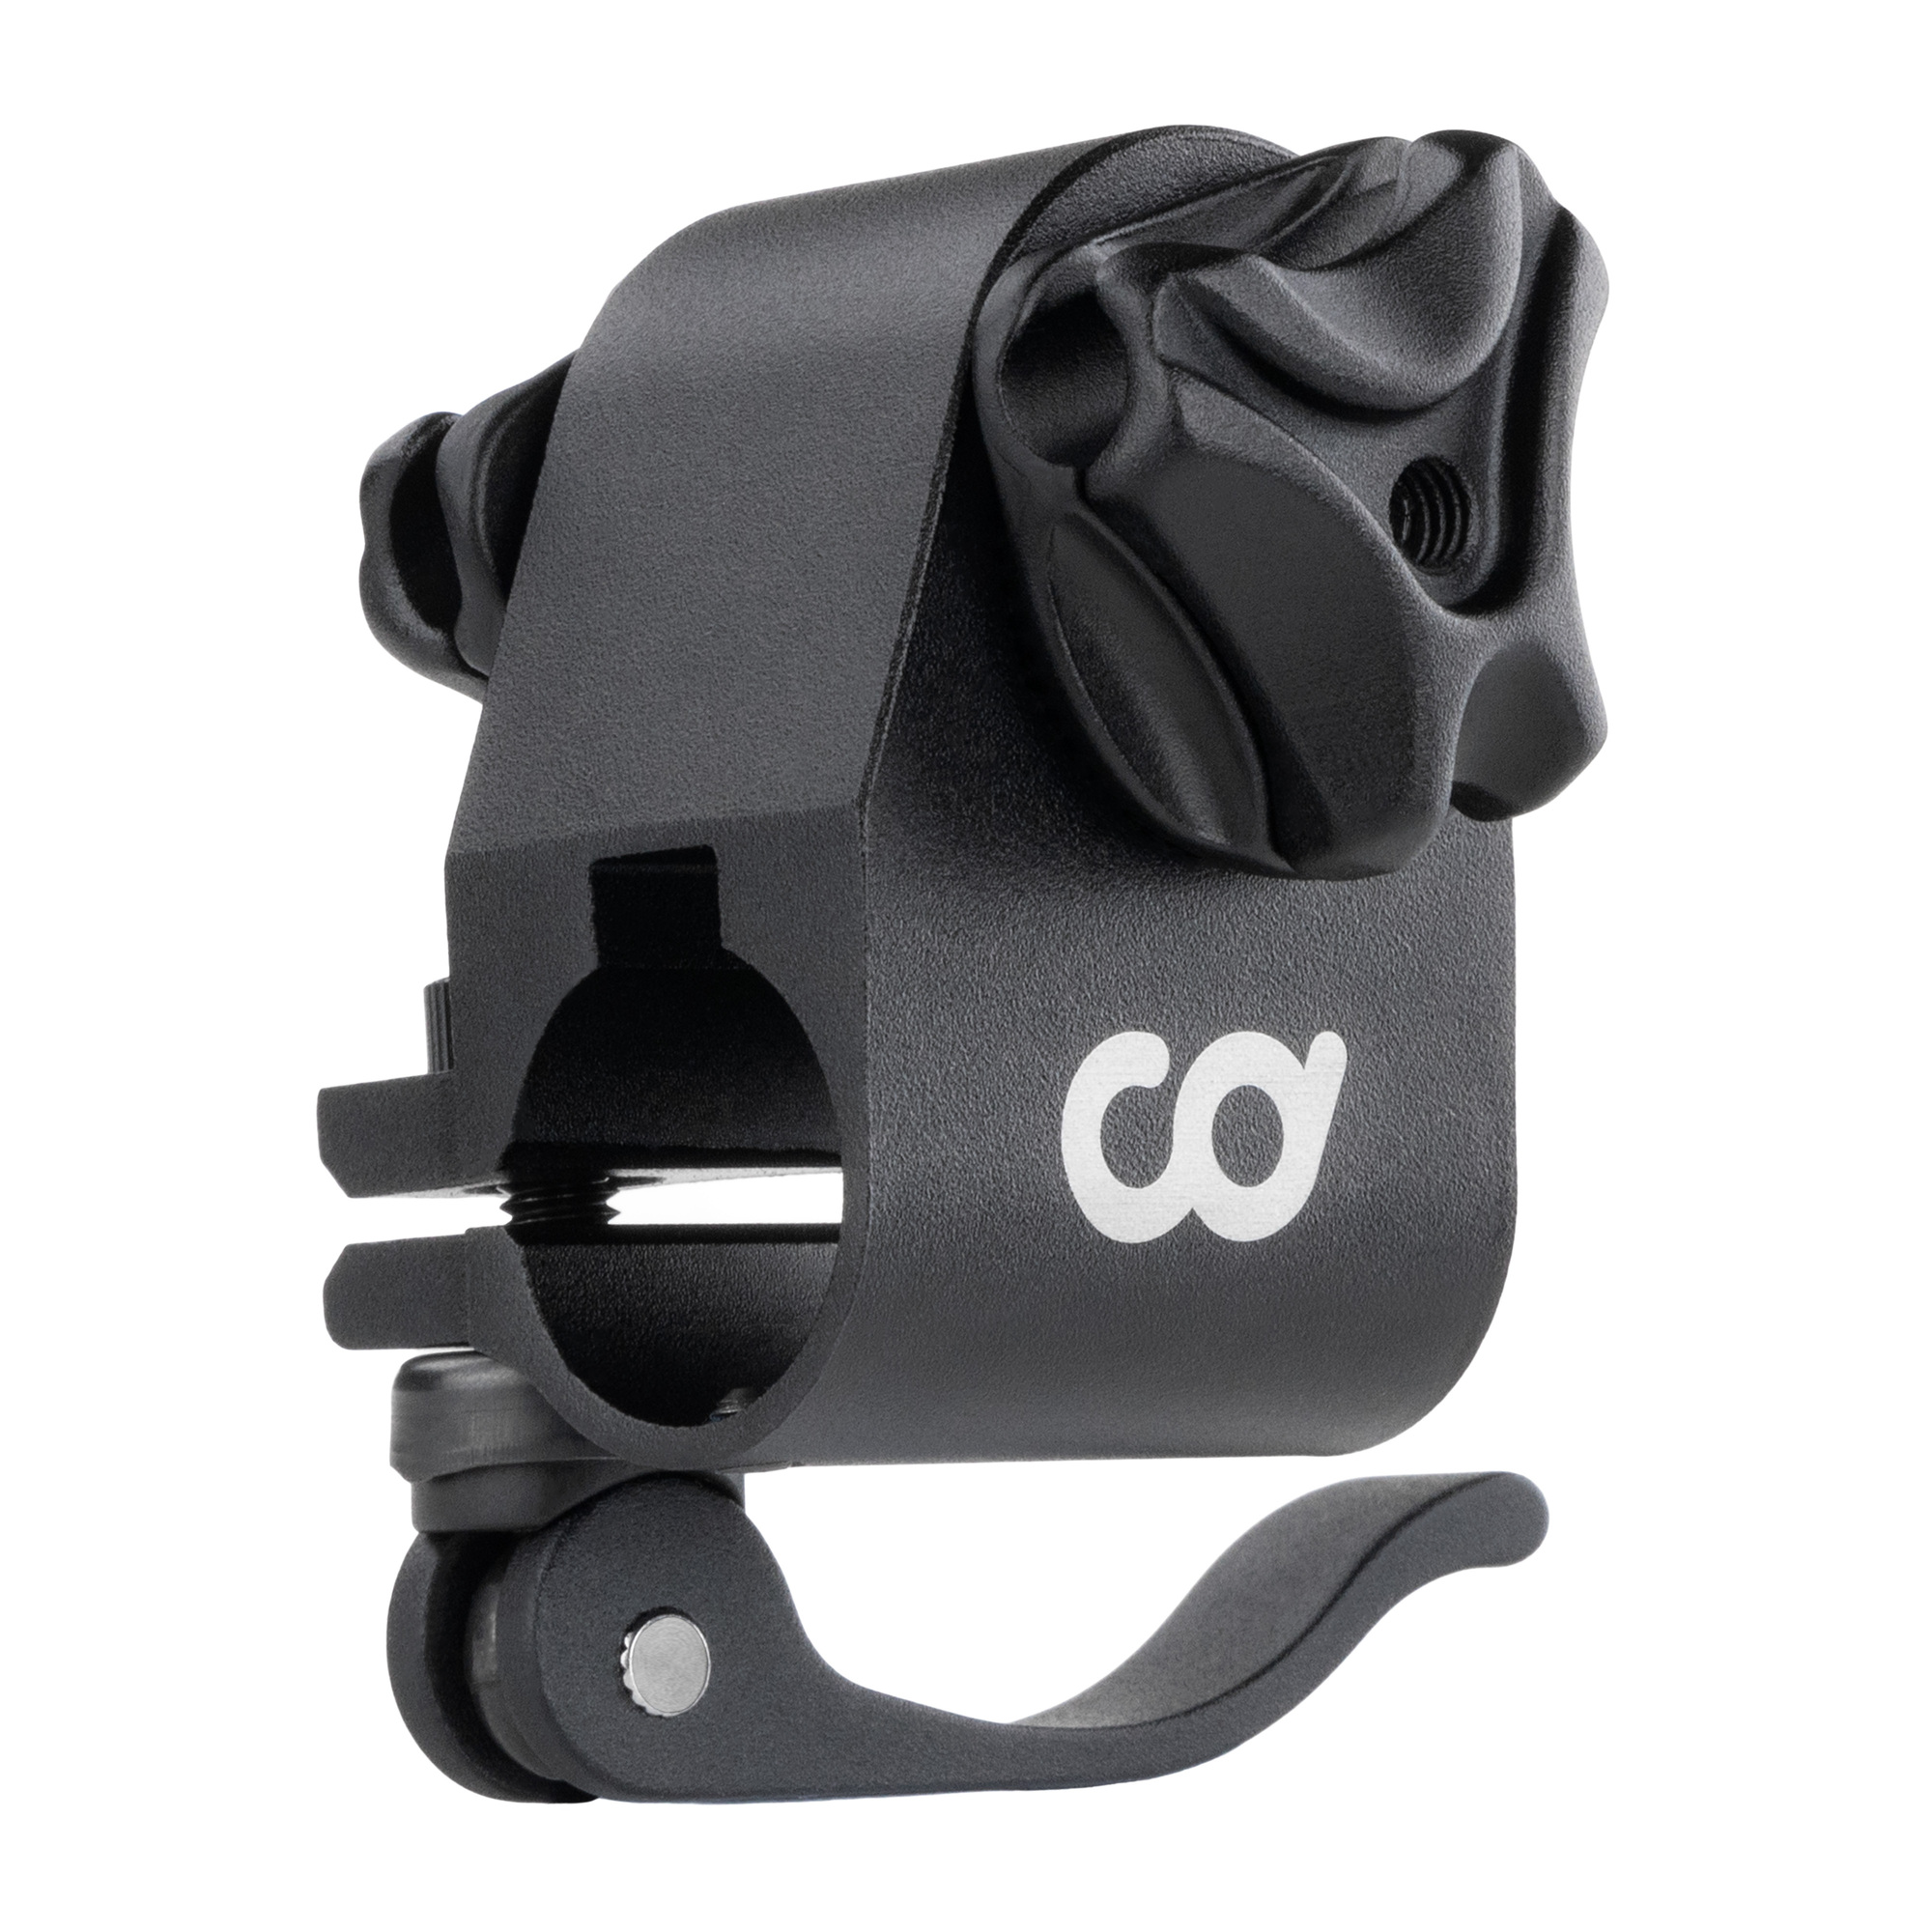 CD Quick Release Seat Clamp Adapter - Compatible with Peloton Bike & Bike+ ONLY - Fits Most Saddles - Made of Premium Quality Aluminium 